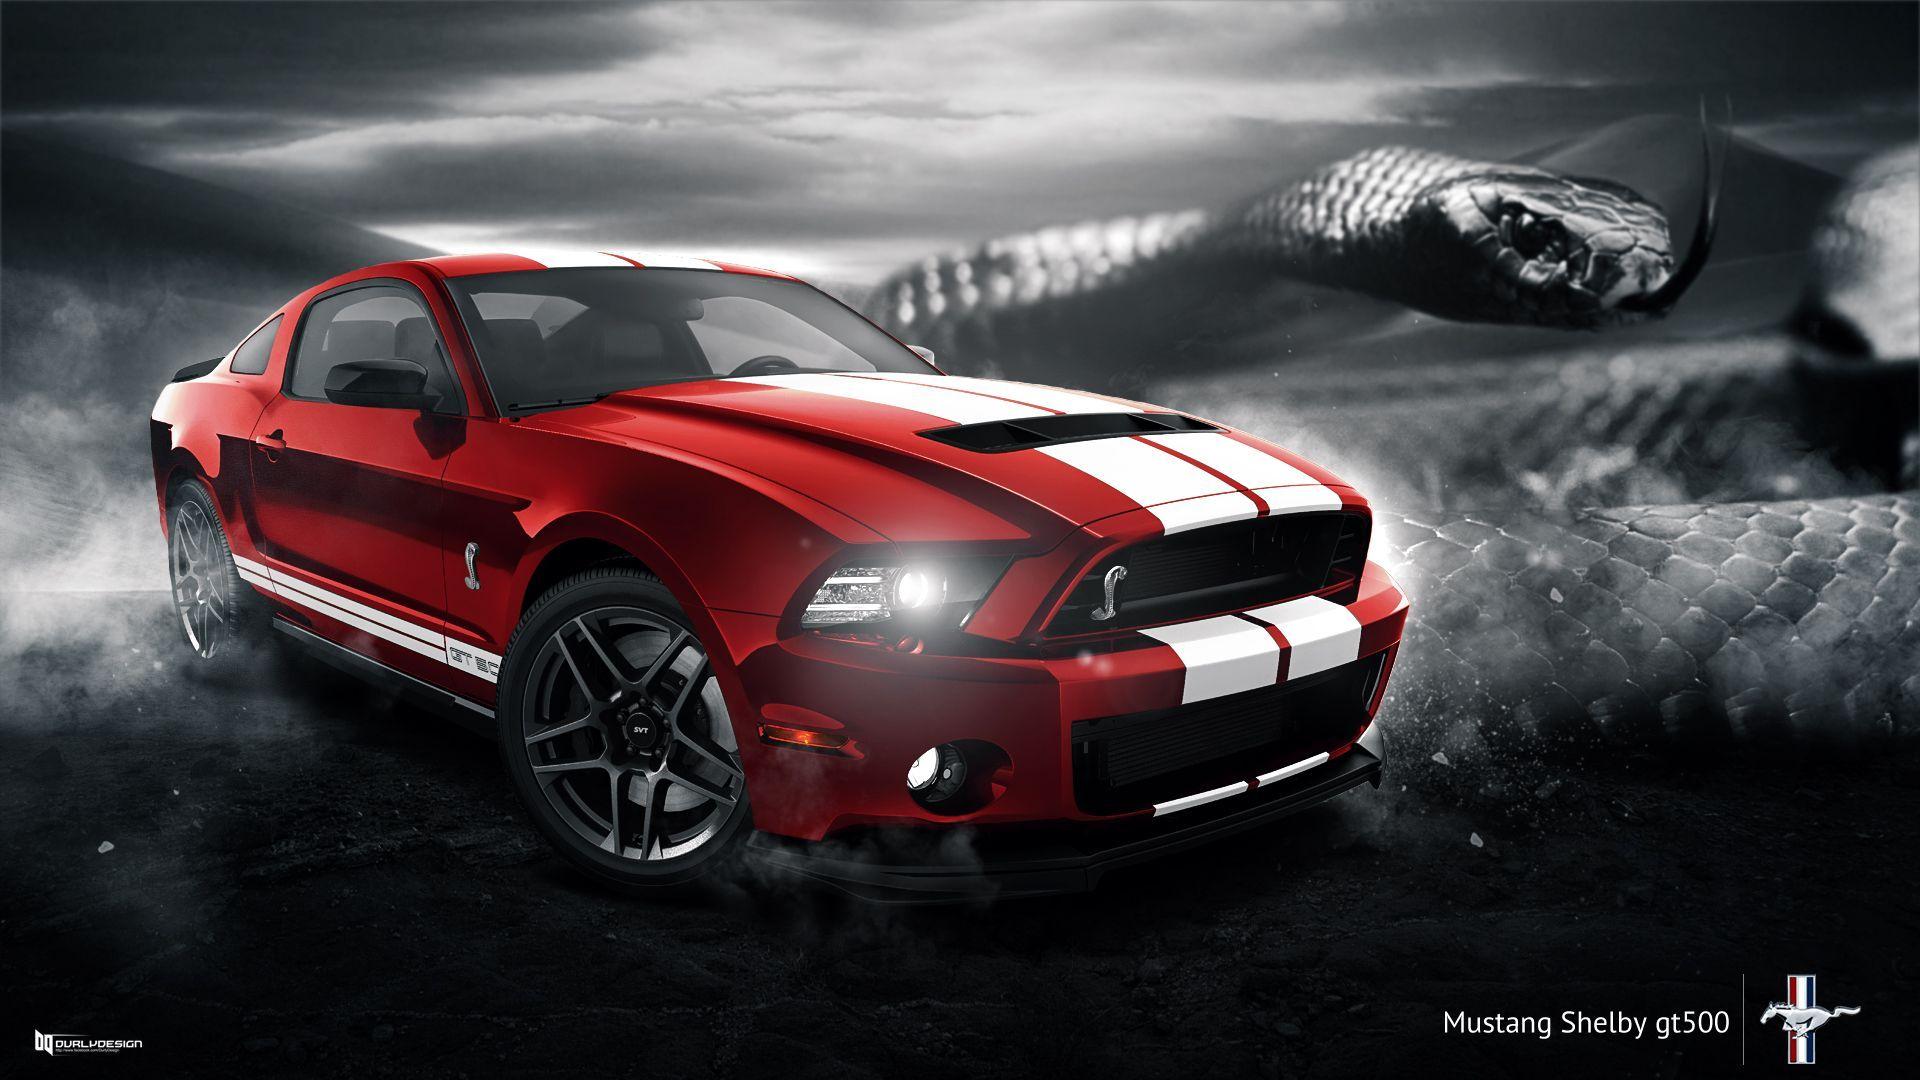 Ford Shelby Gt-H Wallpapers